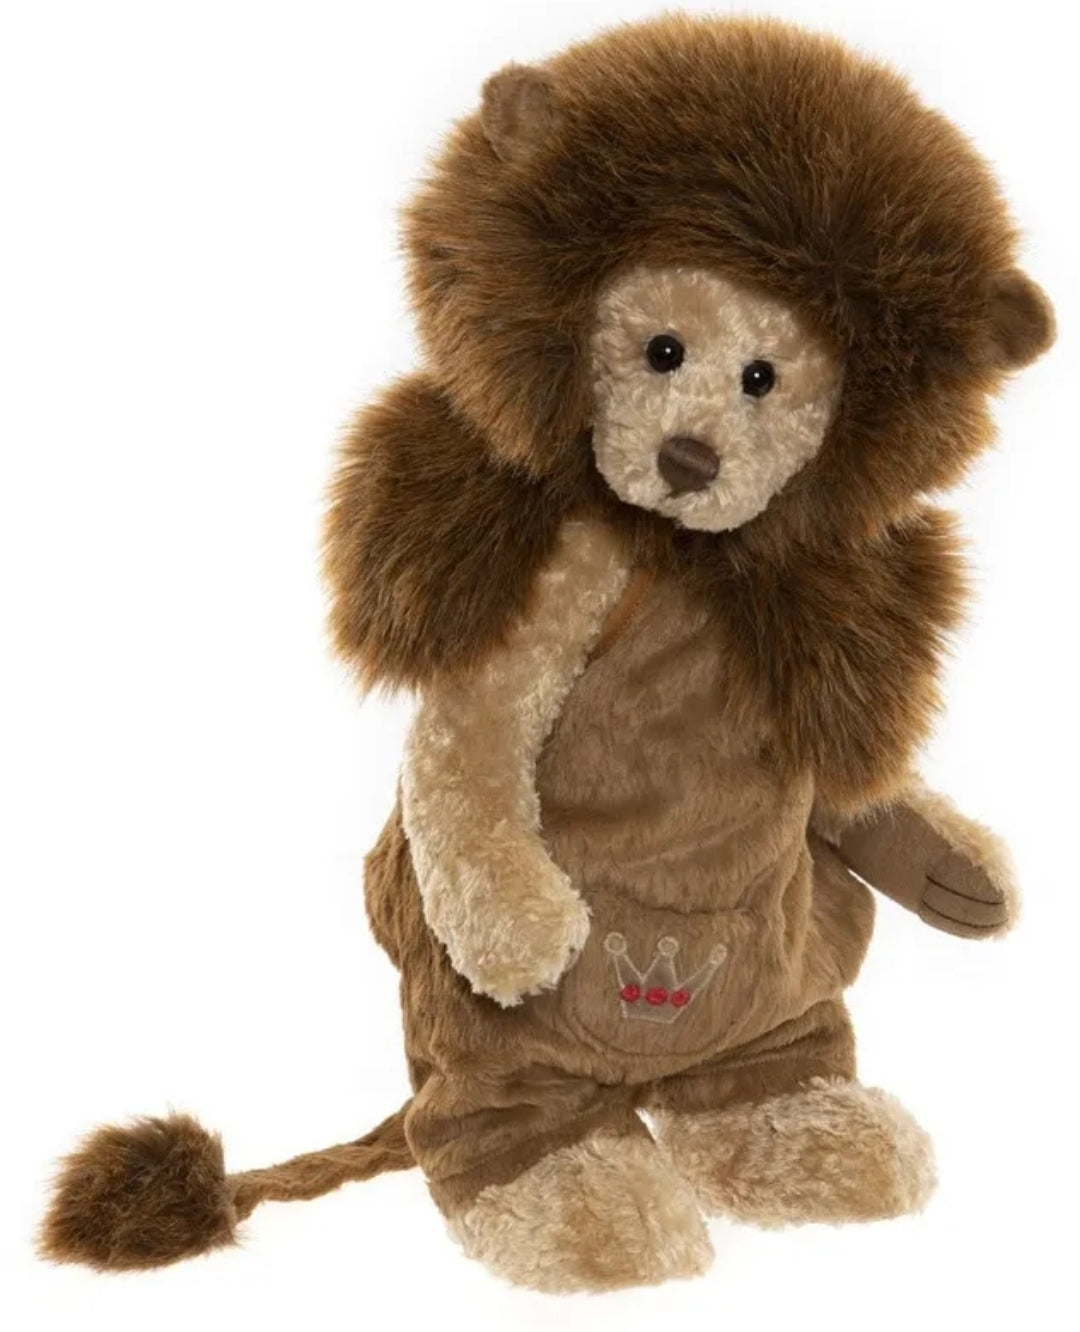 Snooze - 14" Bear in Removable Lion Jammies by Charlie Bears